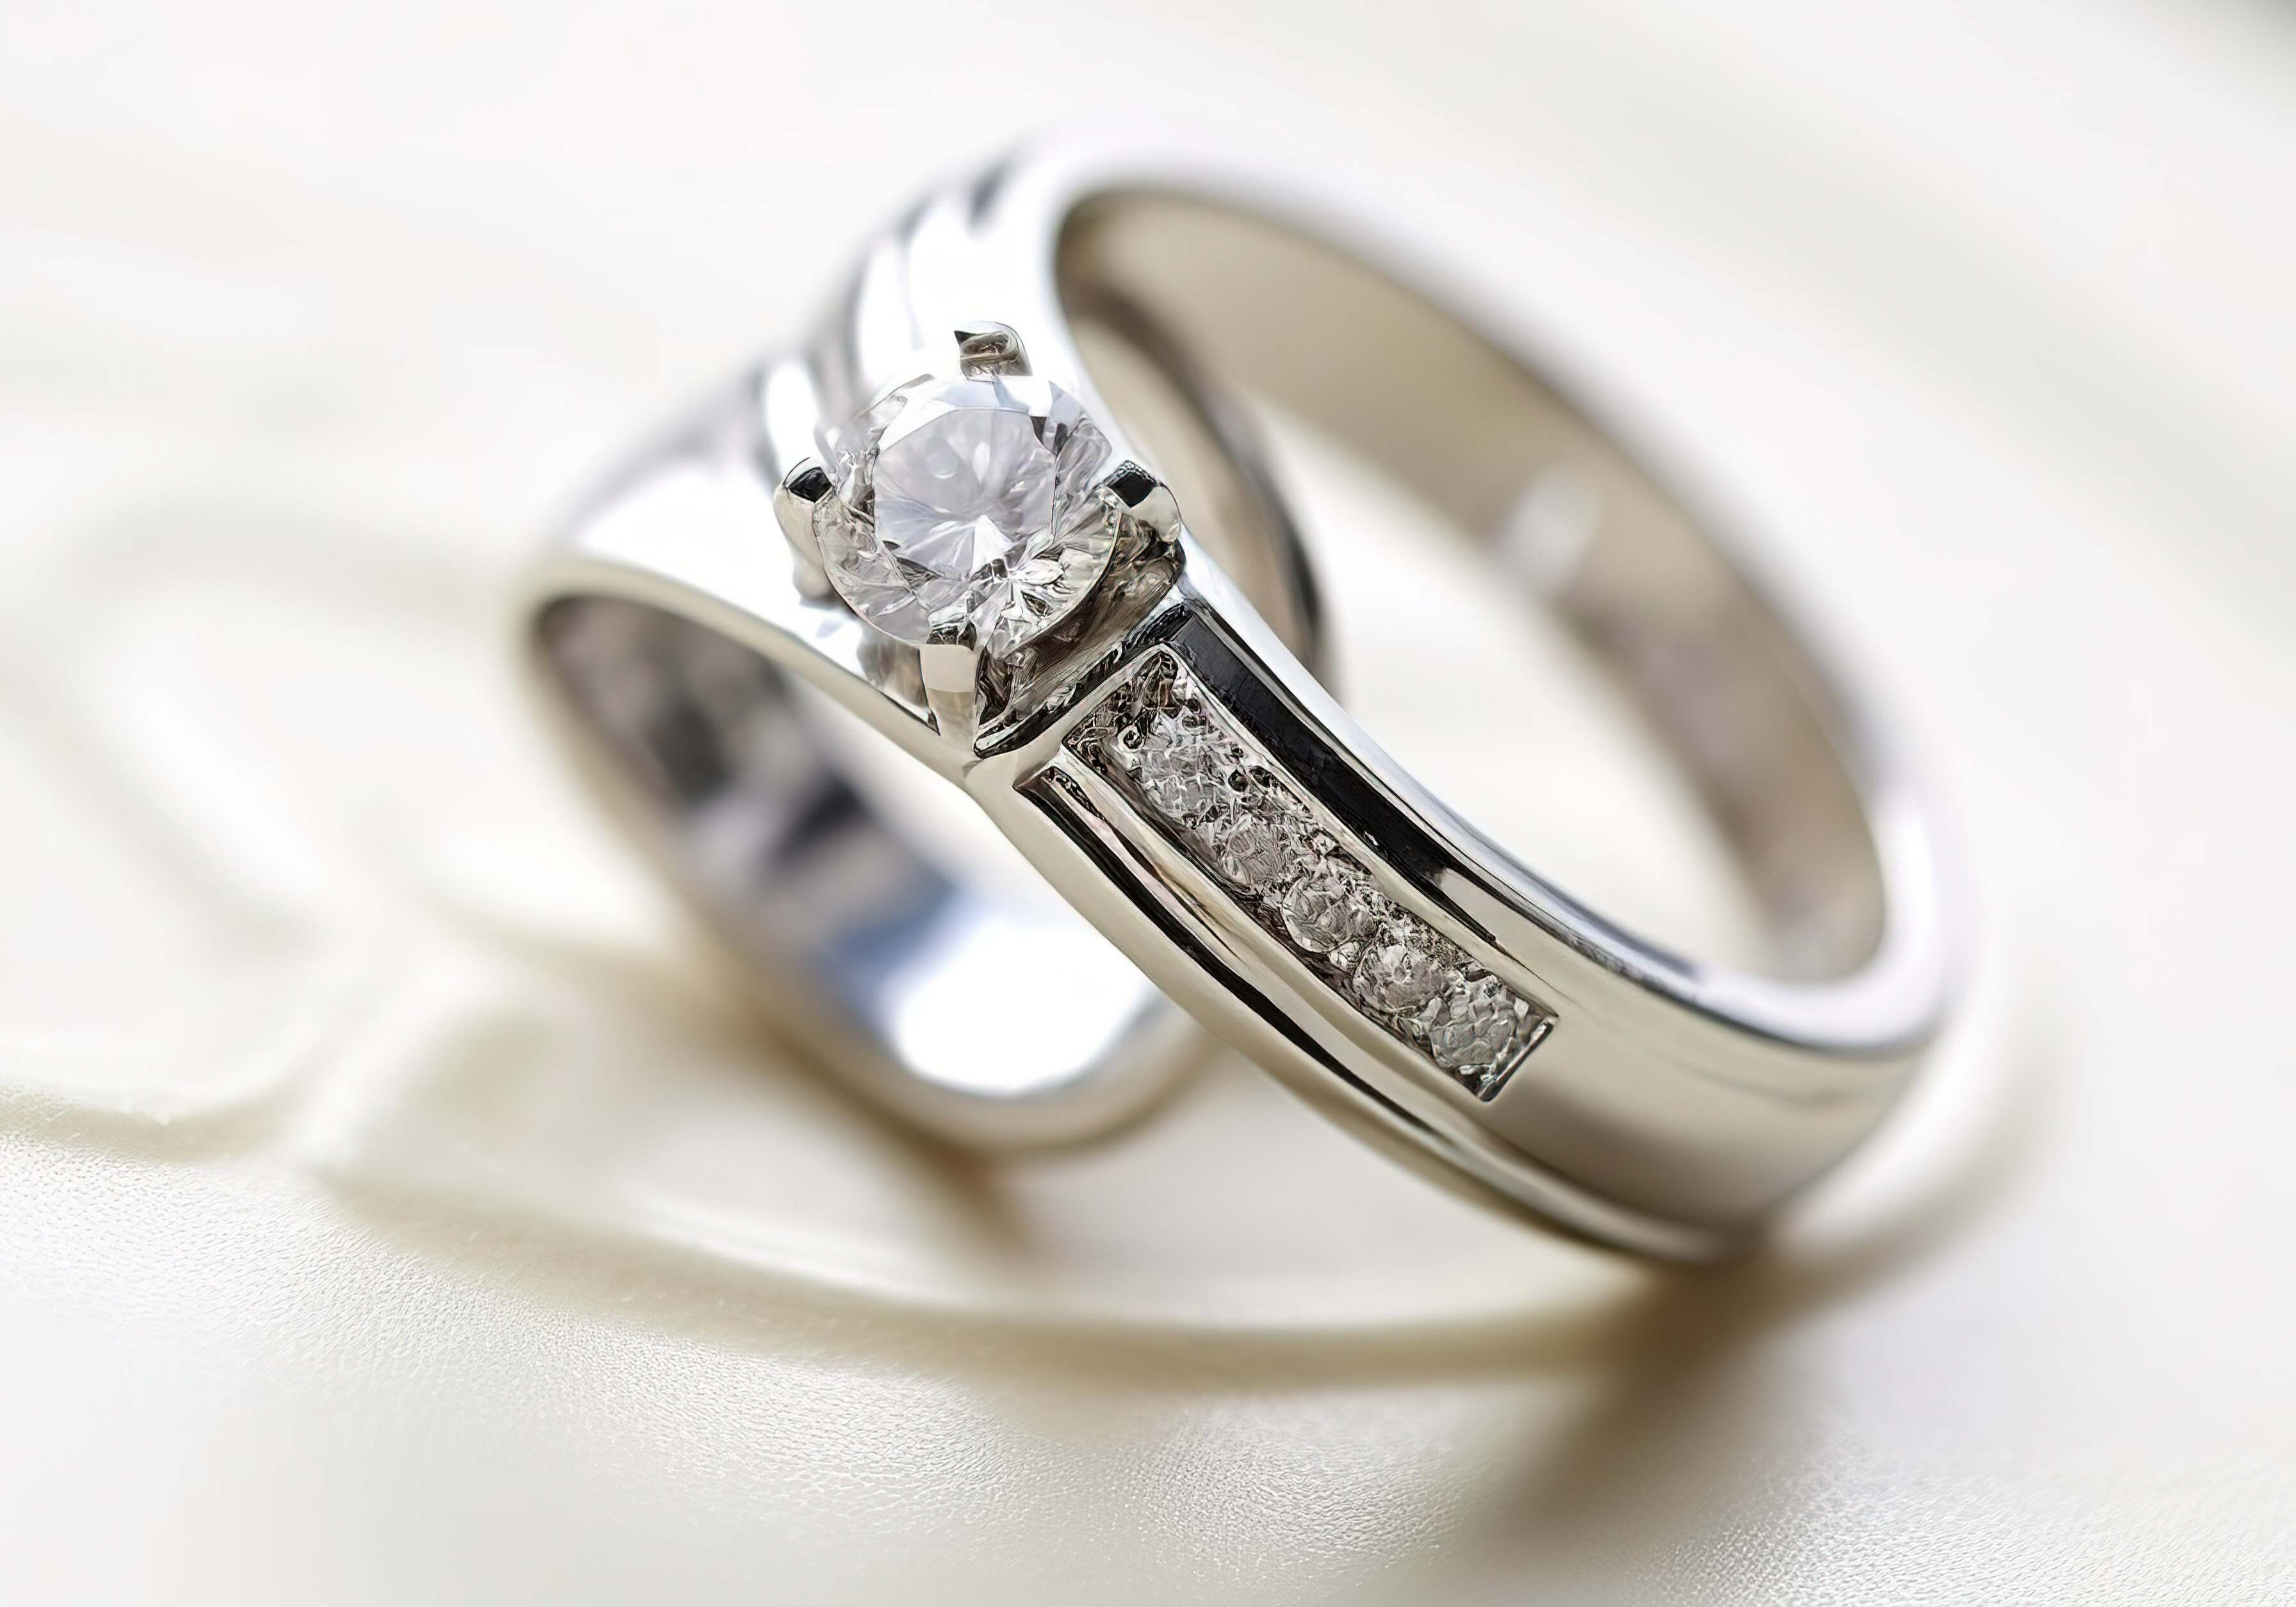 —Pngtree—the wedding ring rings_13247461